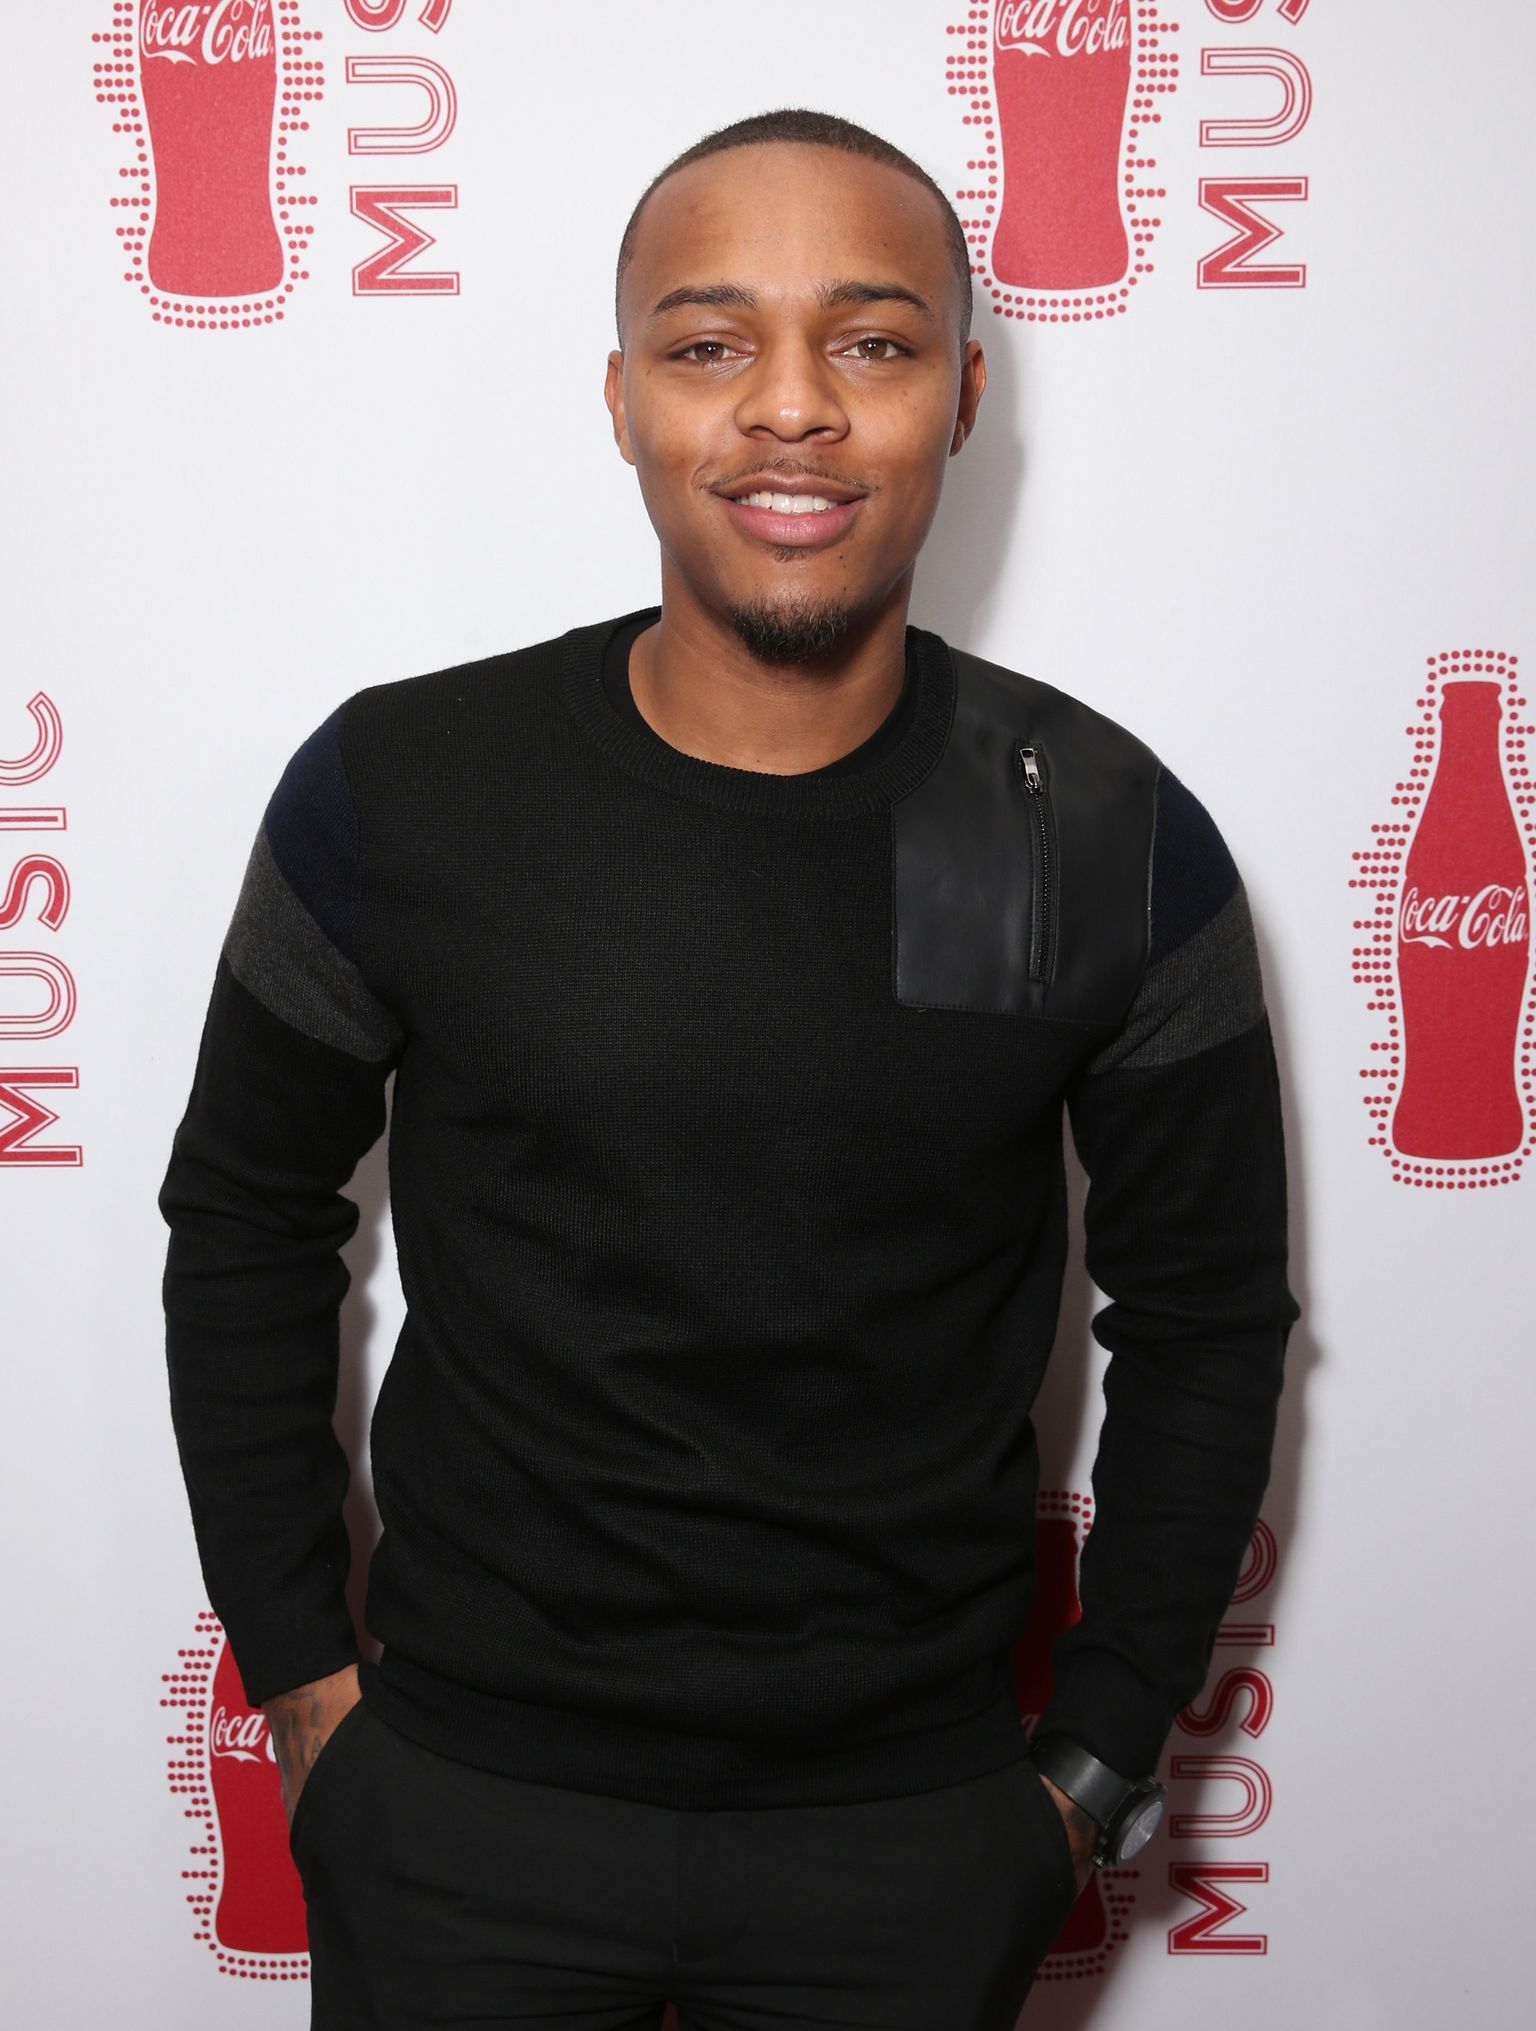 Rapper Bow Wow at the American Music Awards Pre Party on November 20, 2015 in Los Angeles. | Photo: Getty Images